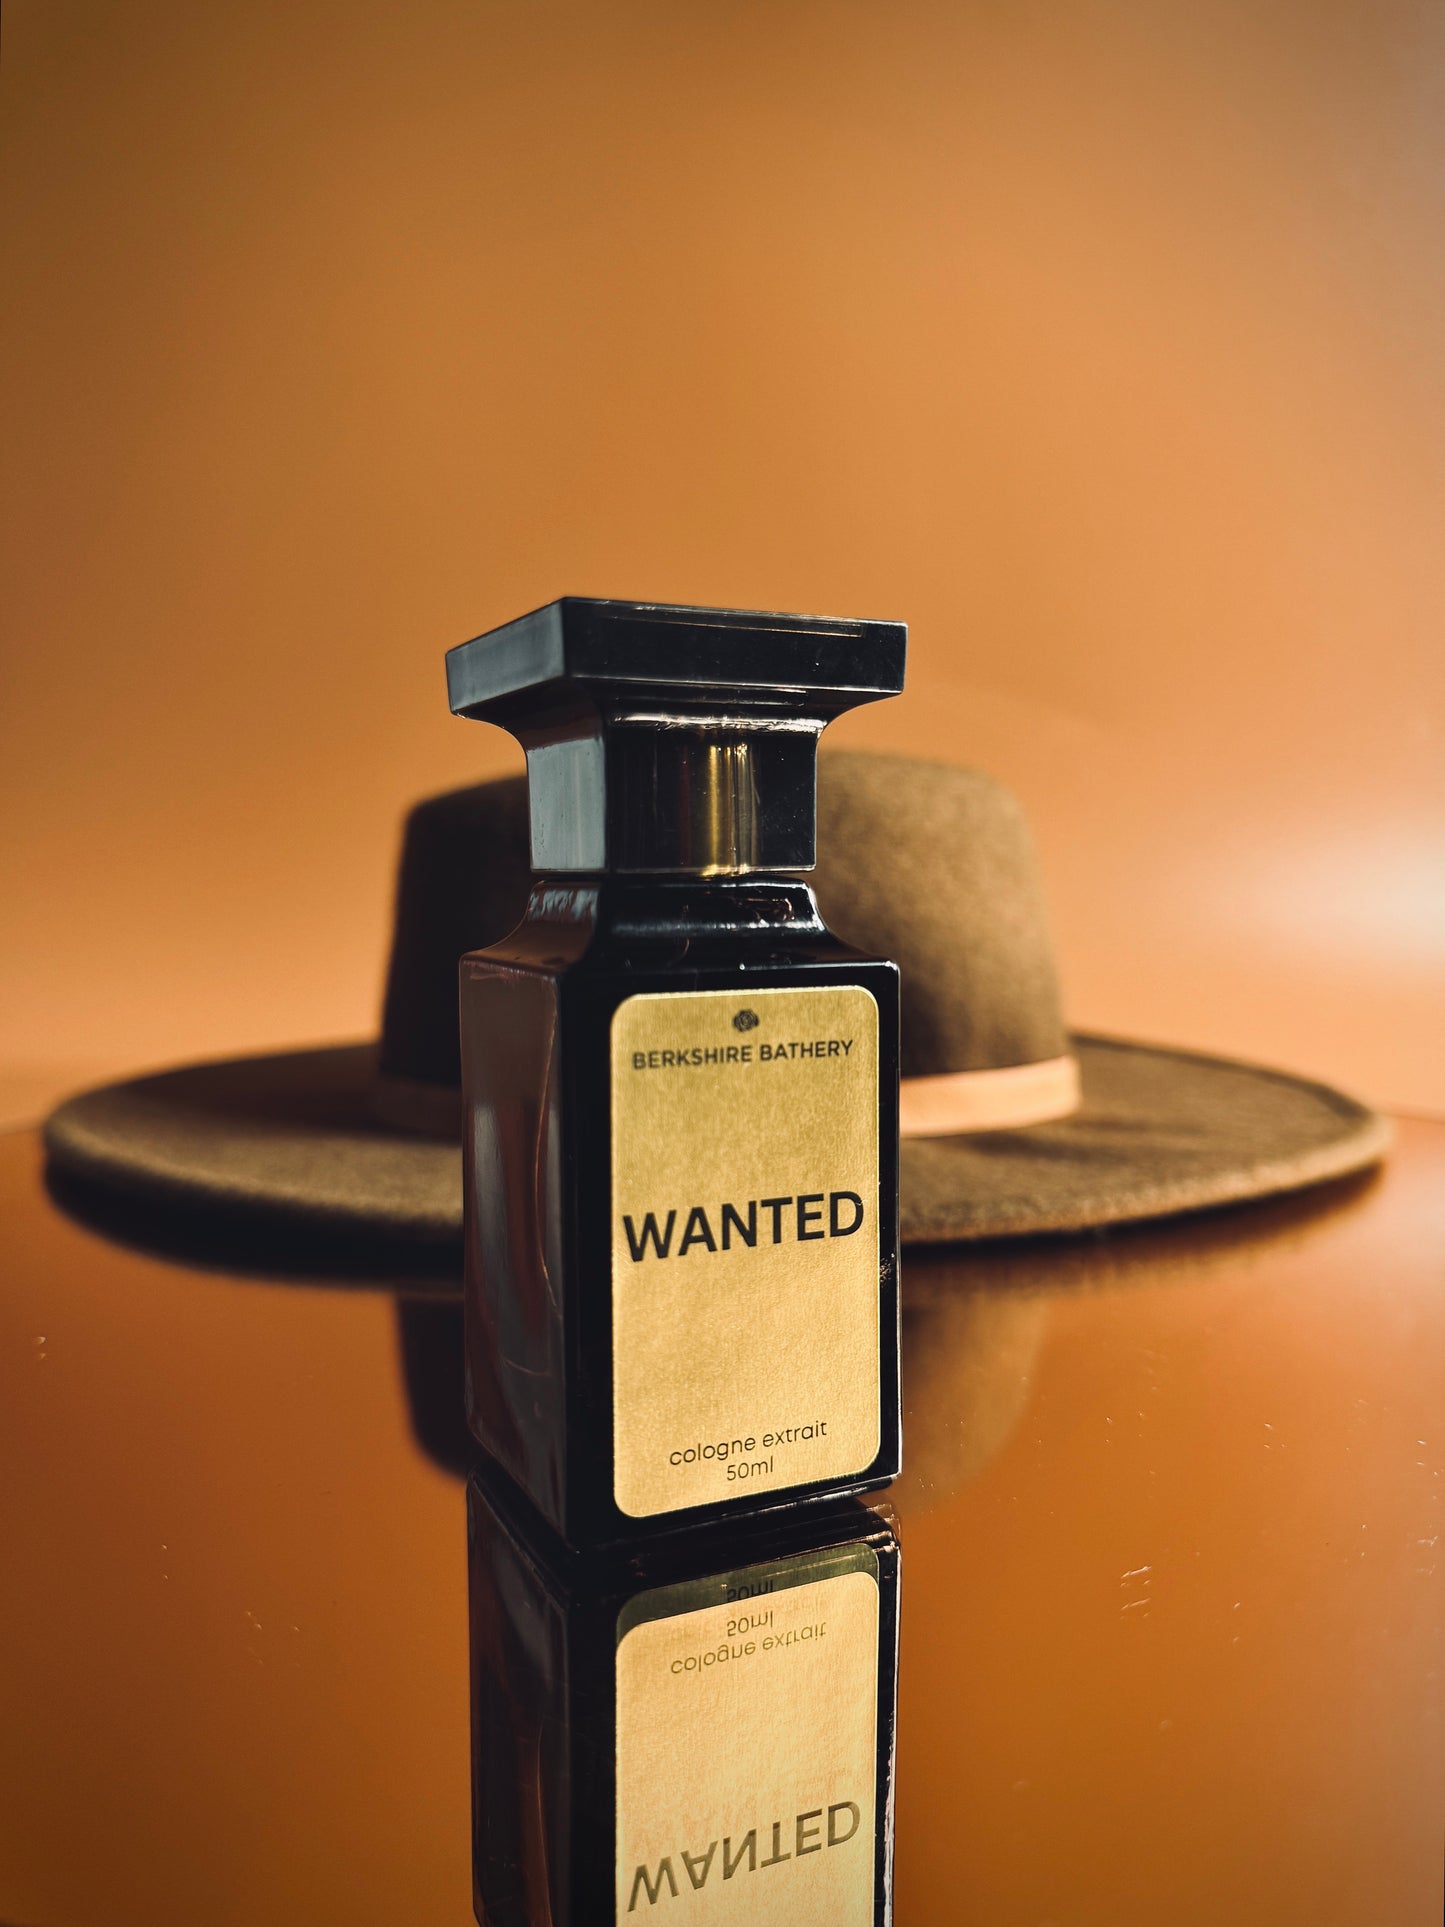 WANTED | Spicy + Citrus + Woody - 50ml Cologne Extrait